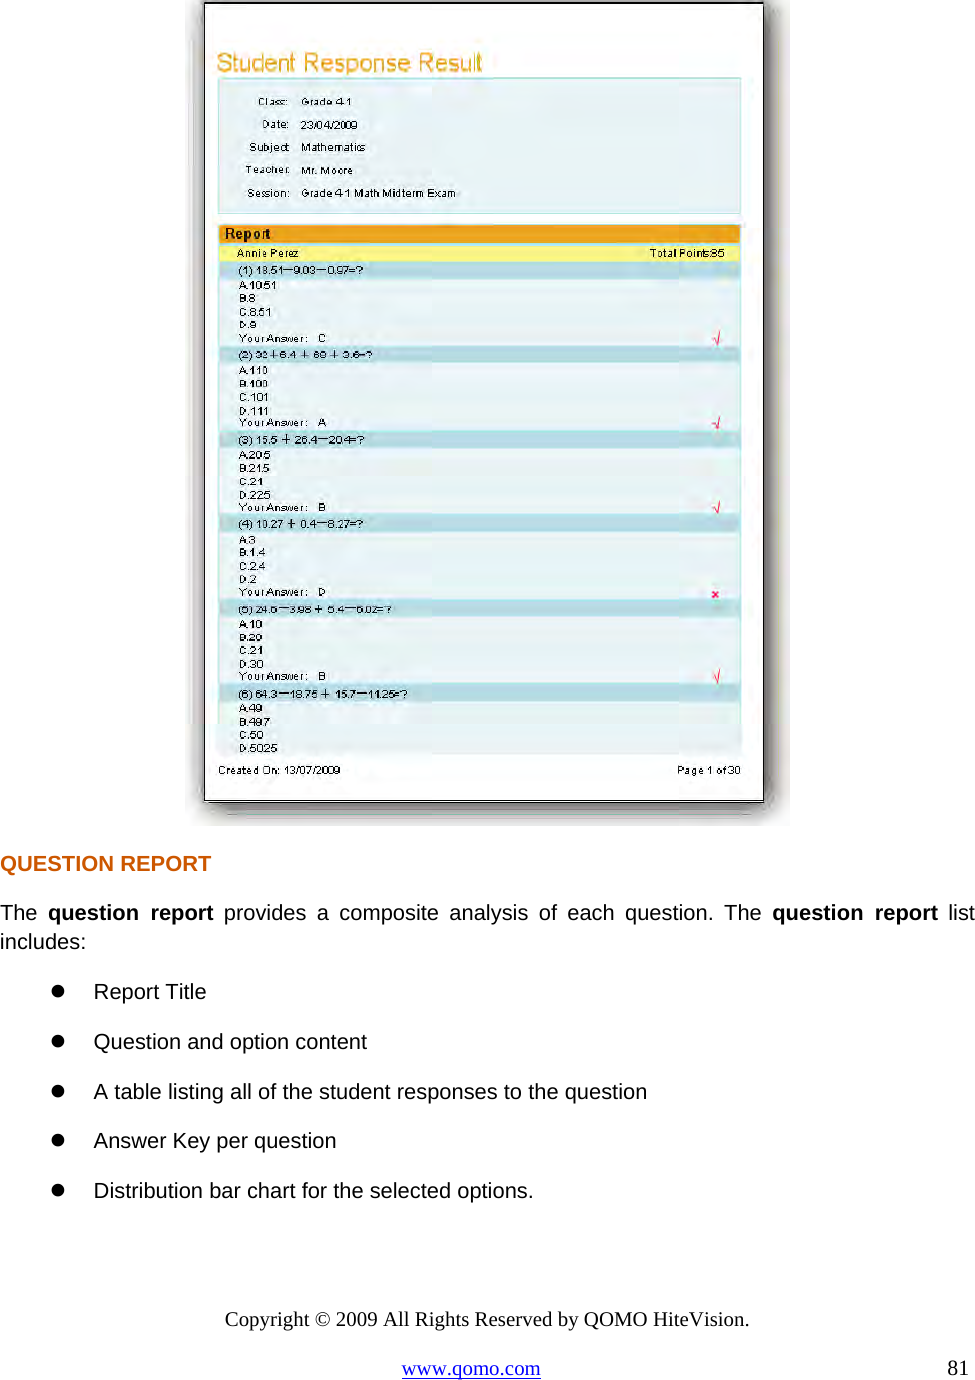 Copyright © 2009 All Rights Reserved by QOMO HiteVision. www.qomo.com                                                                          81   QUESTION REPORT The  question report provides a composite analysis of each question. The question report list includes:   Report Title   Question and option content   A table listing all of the student responses to the question   Answer Key per question   Distribution bar chart for the selected options. 